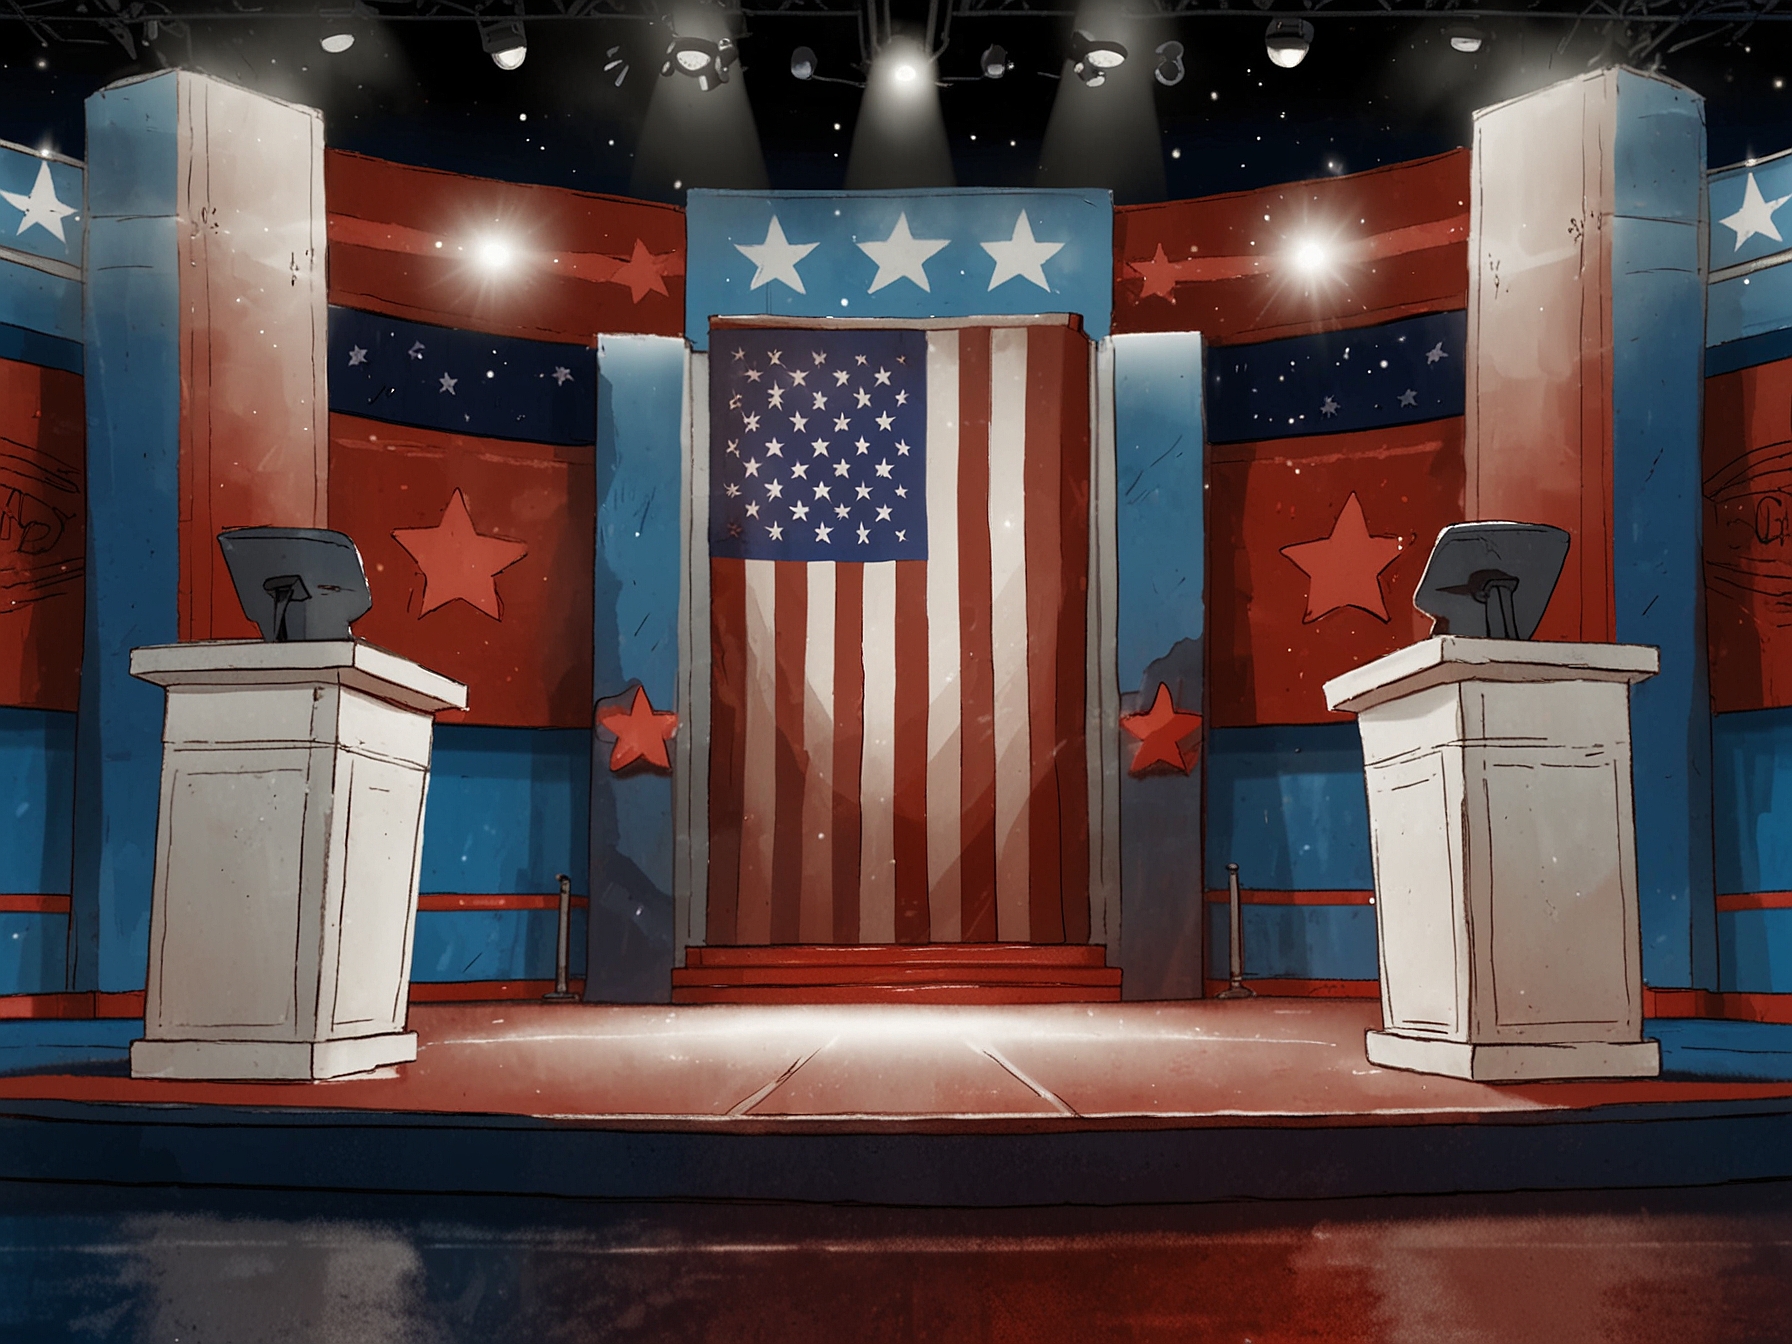 A stage set for a presidential debate, with empty podiums and the American flag in the background, symbolizing the minimal impact debates have on the election outcome according to Allan Lichtman.